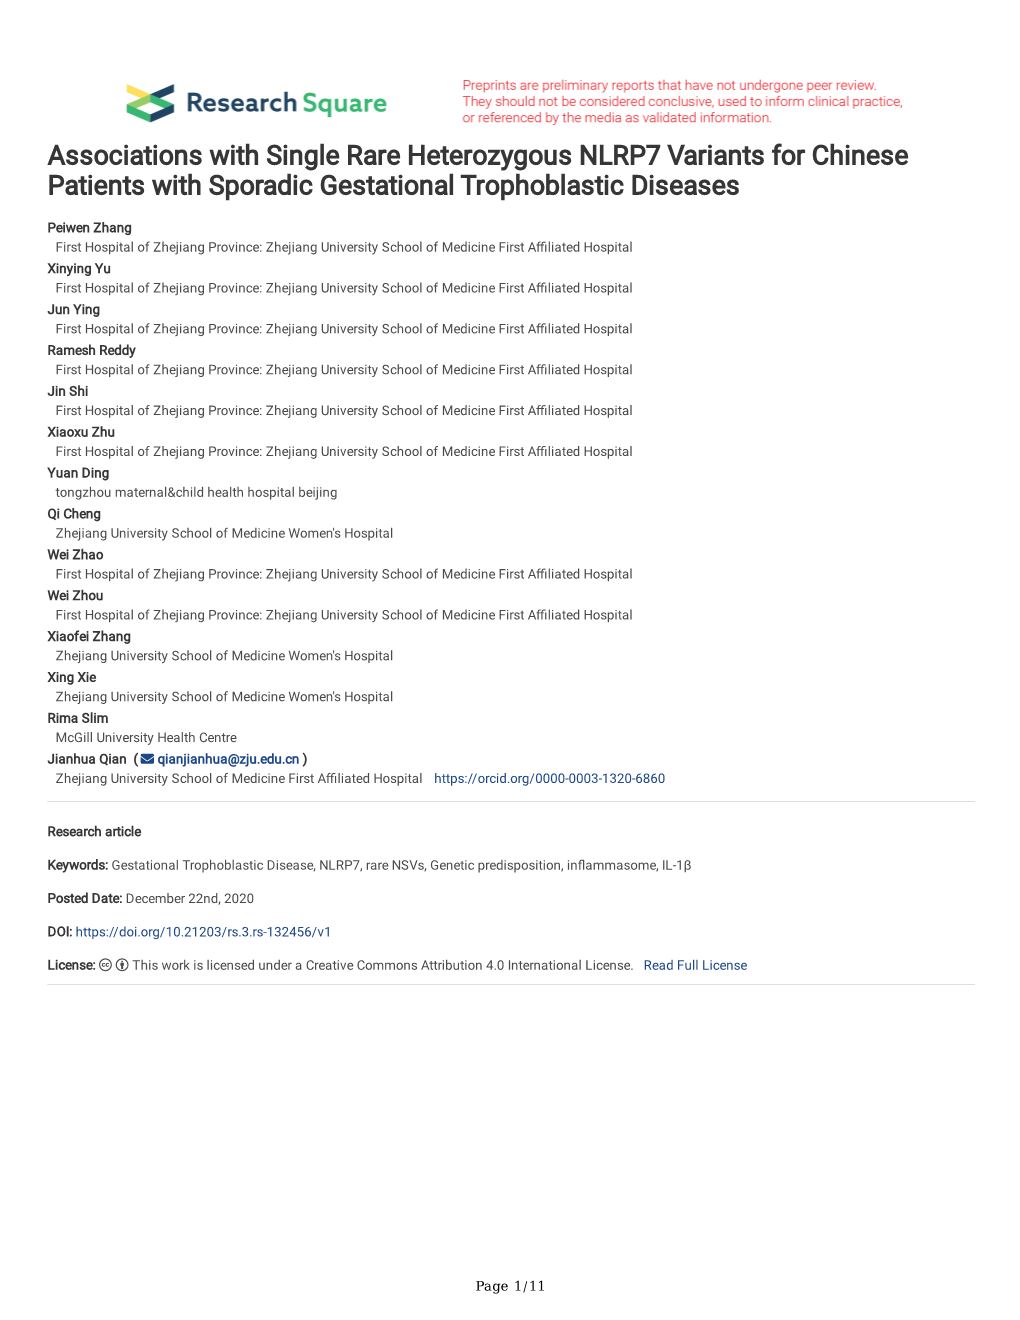 Associations with Single Rare Heterozygous NLRP7 Variants for Chinese Patients with Sporadic Gestational Trophoblastic Diseases